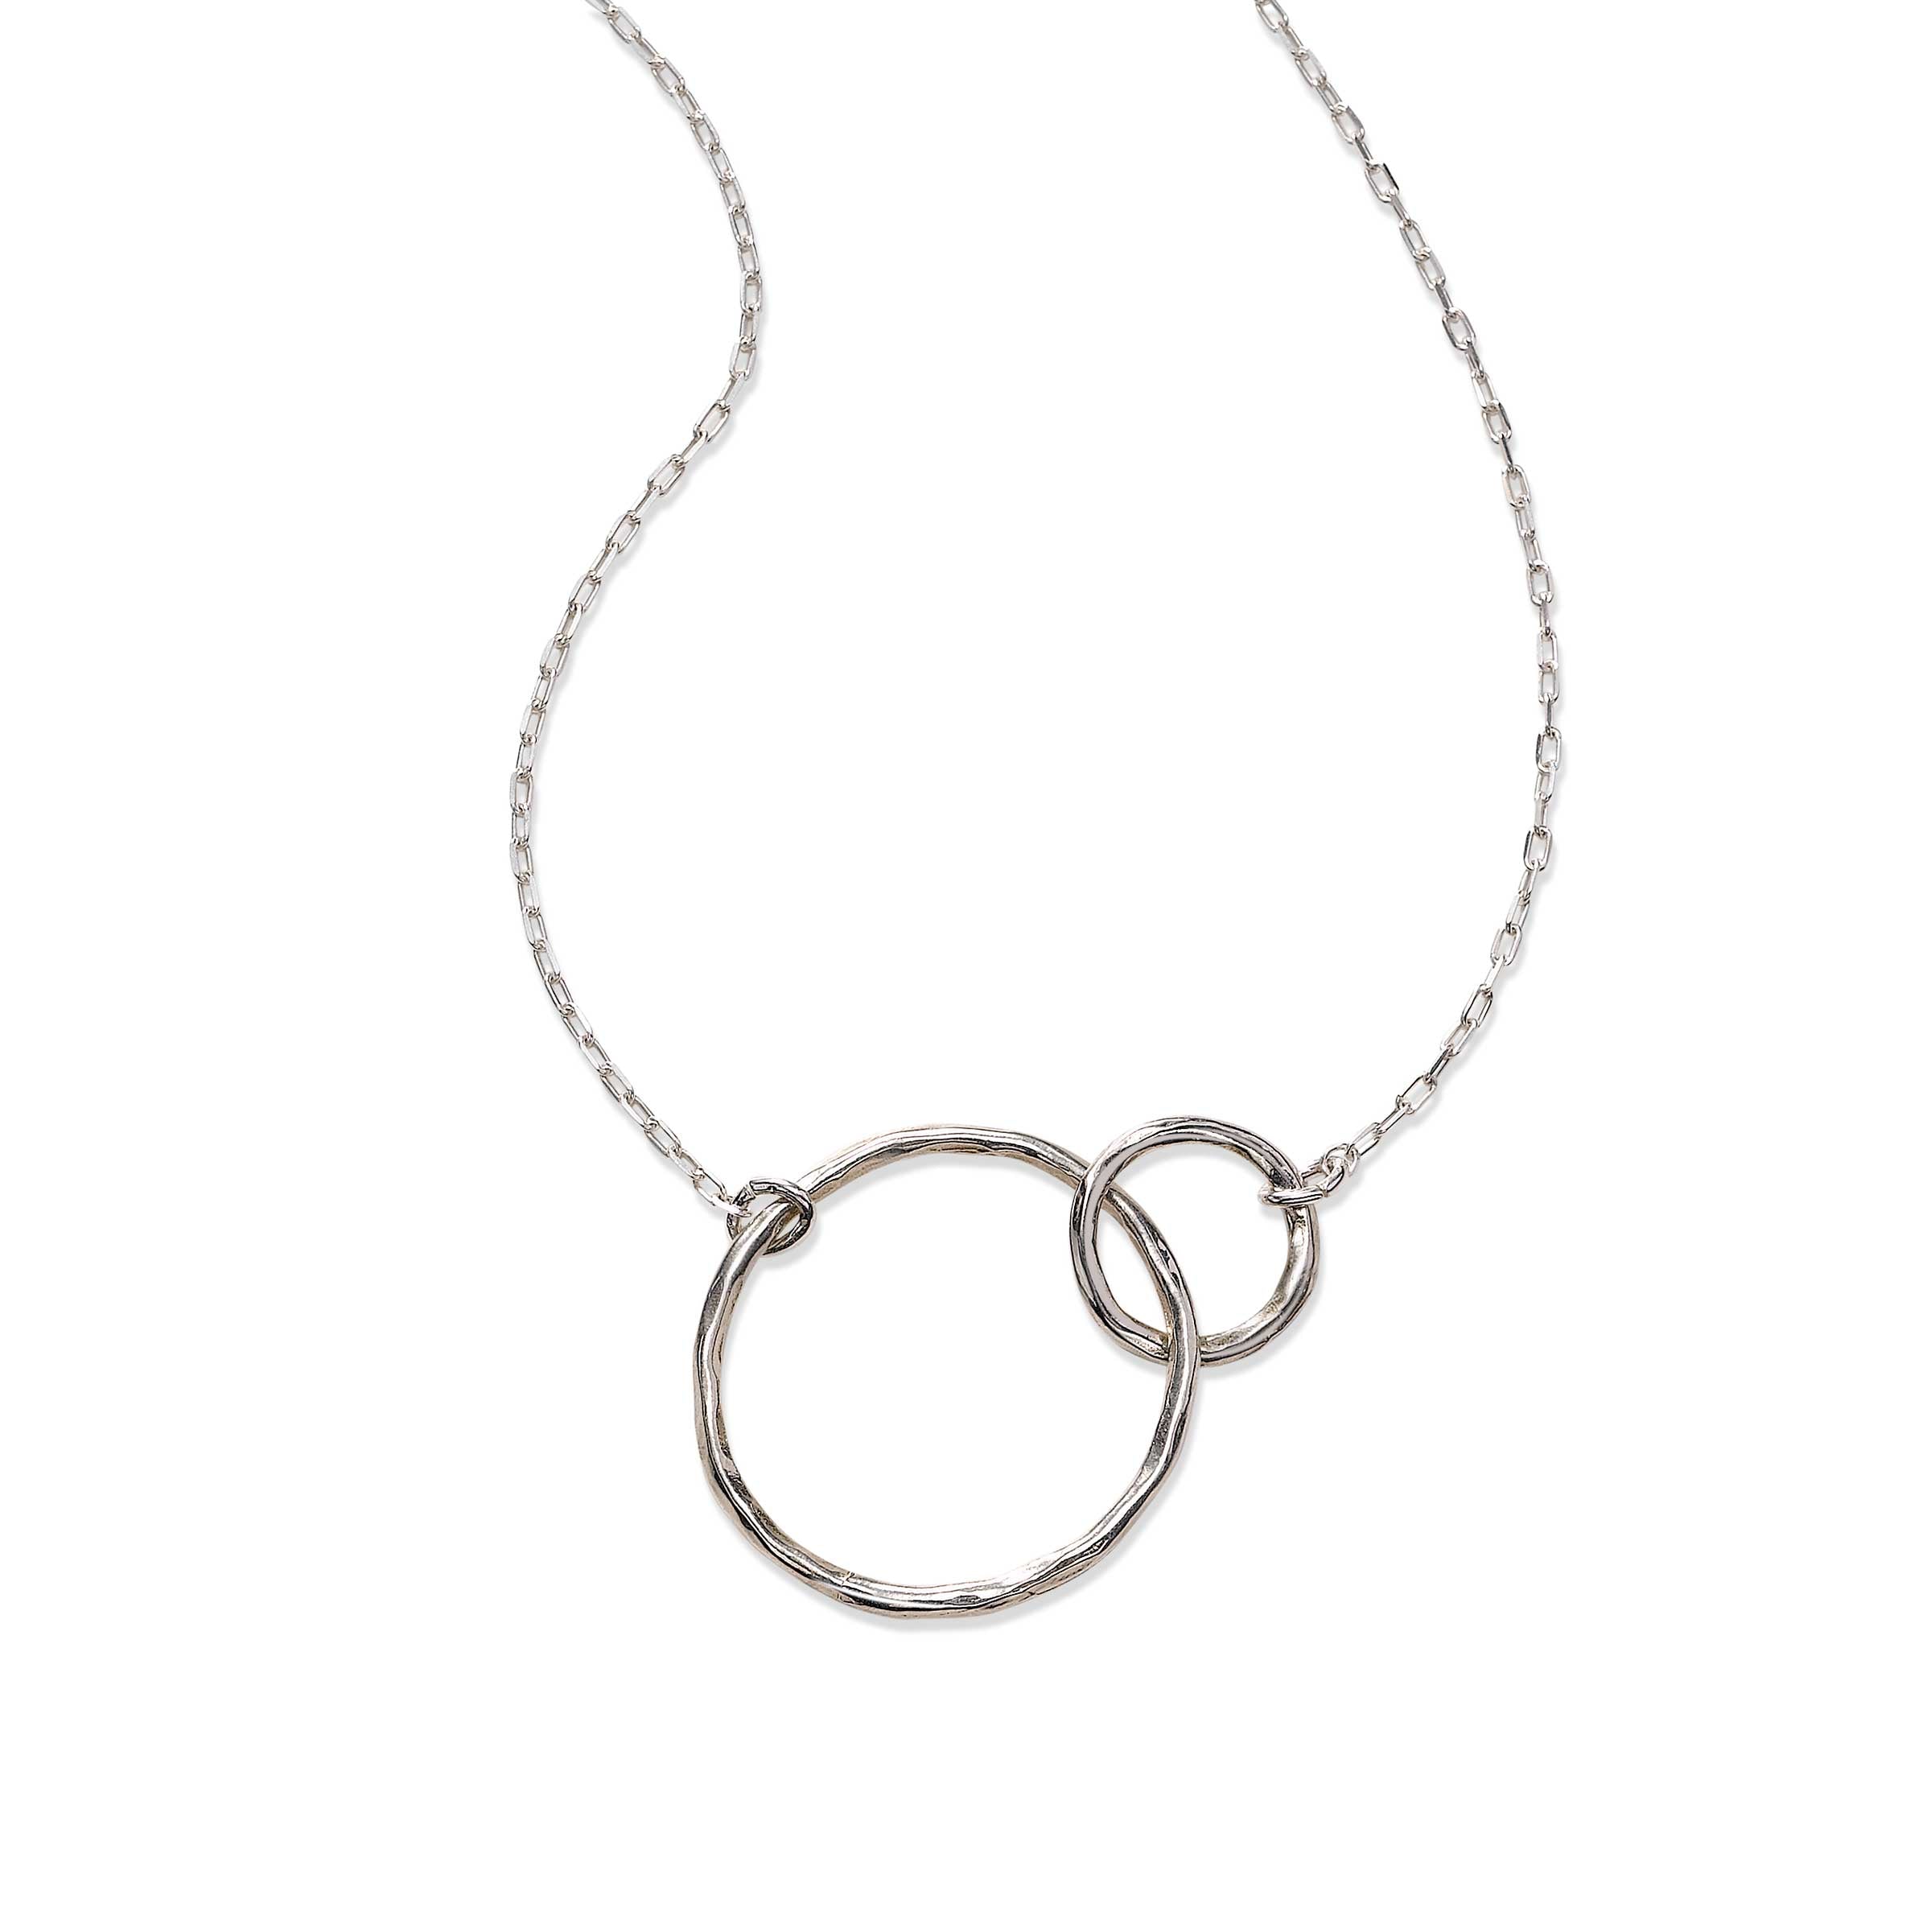 Hammered silver 4 loop necklace | Circle necklace silver, Silver necklace,  Necklace